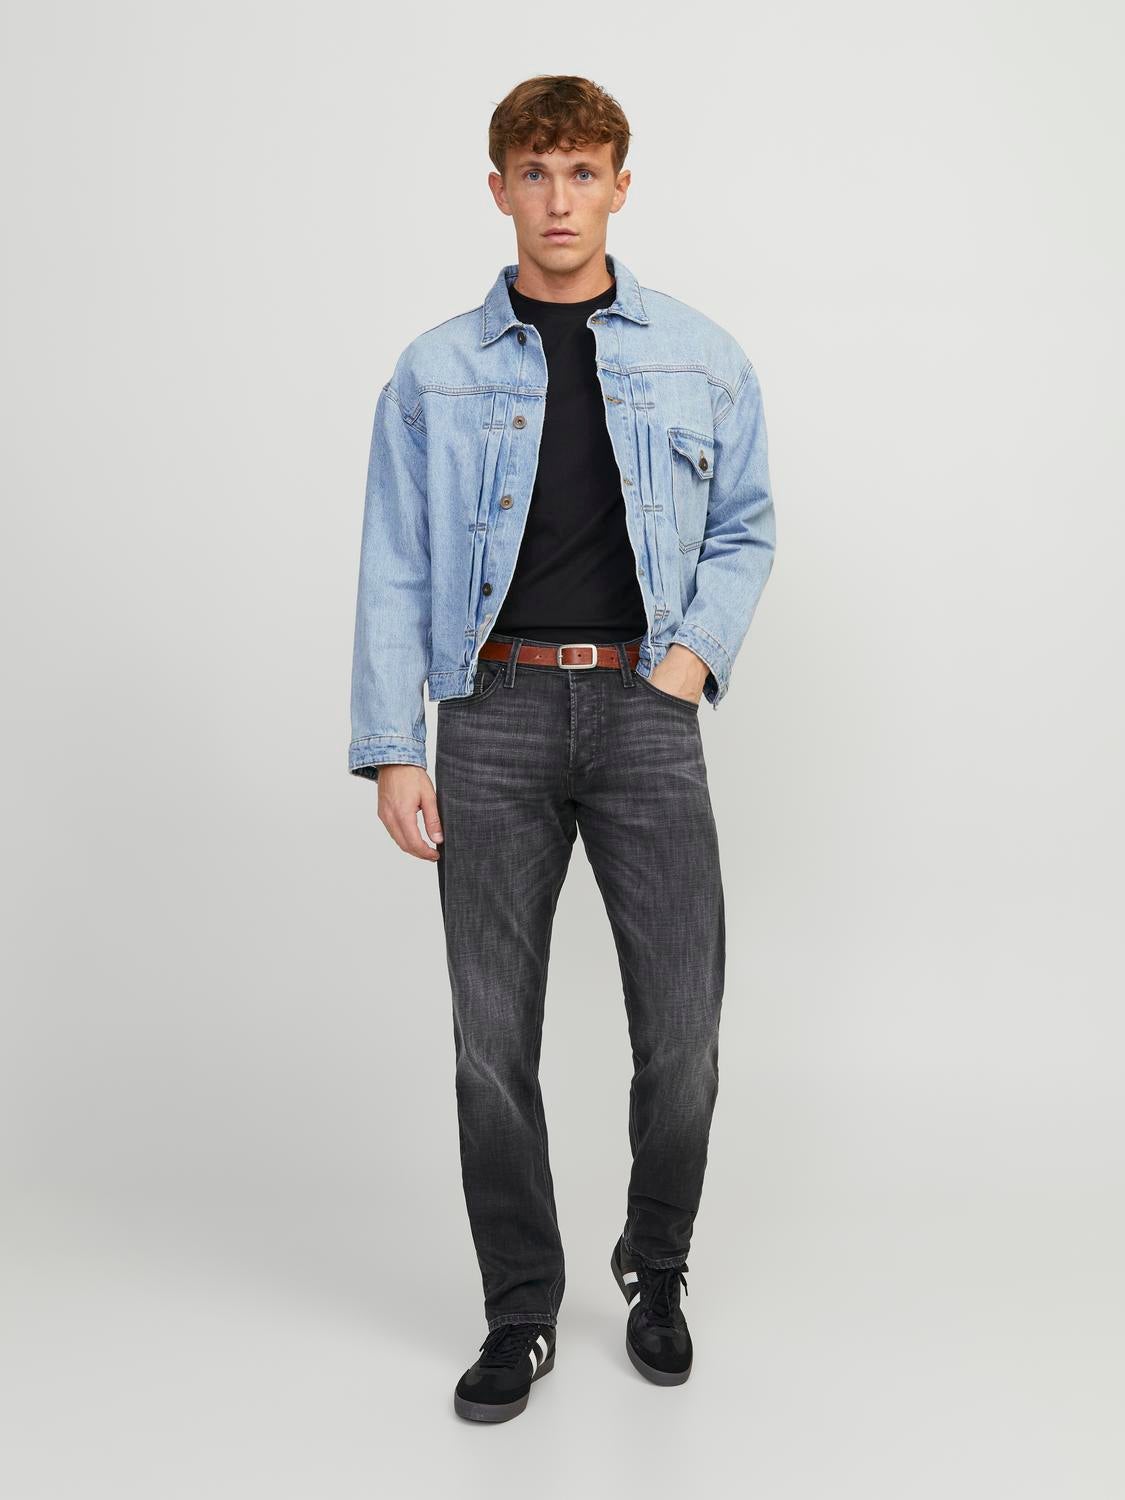 JJICHRIS JJWOOD GE 815 Jeans relaxed fit